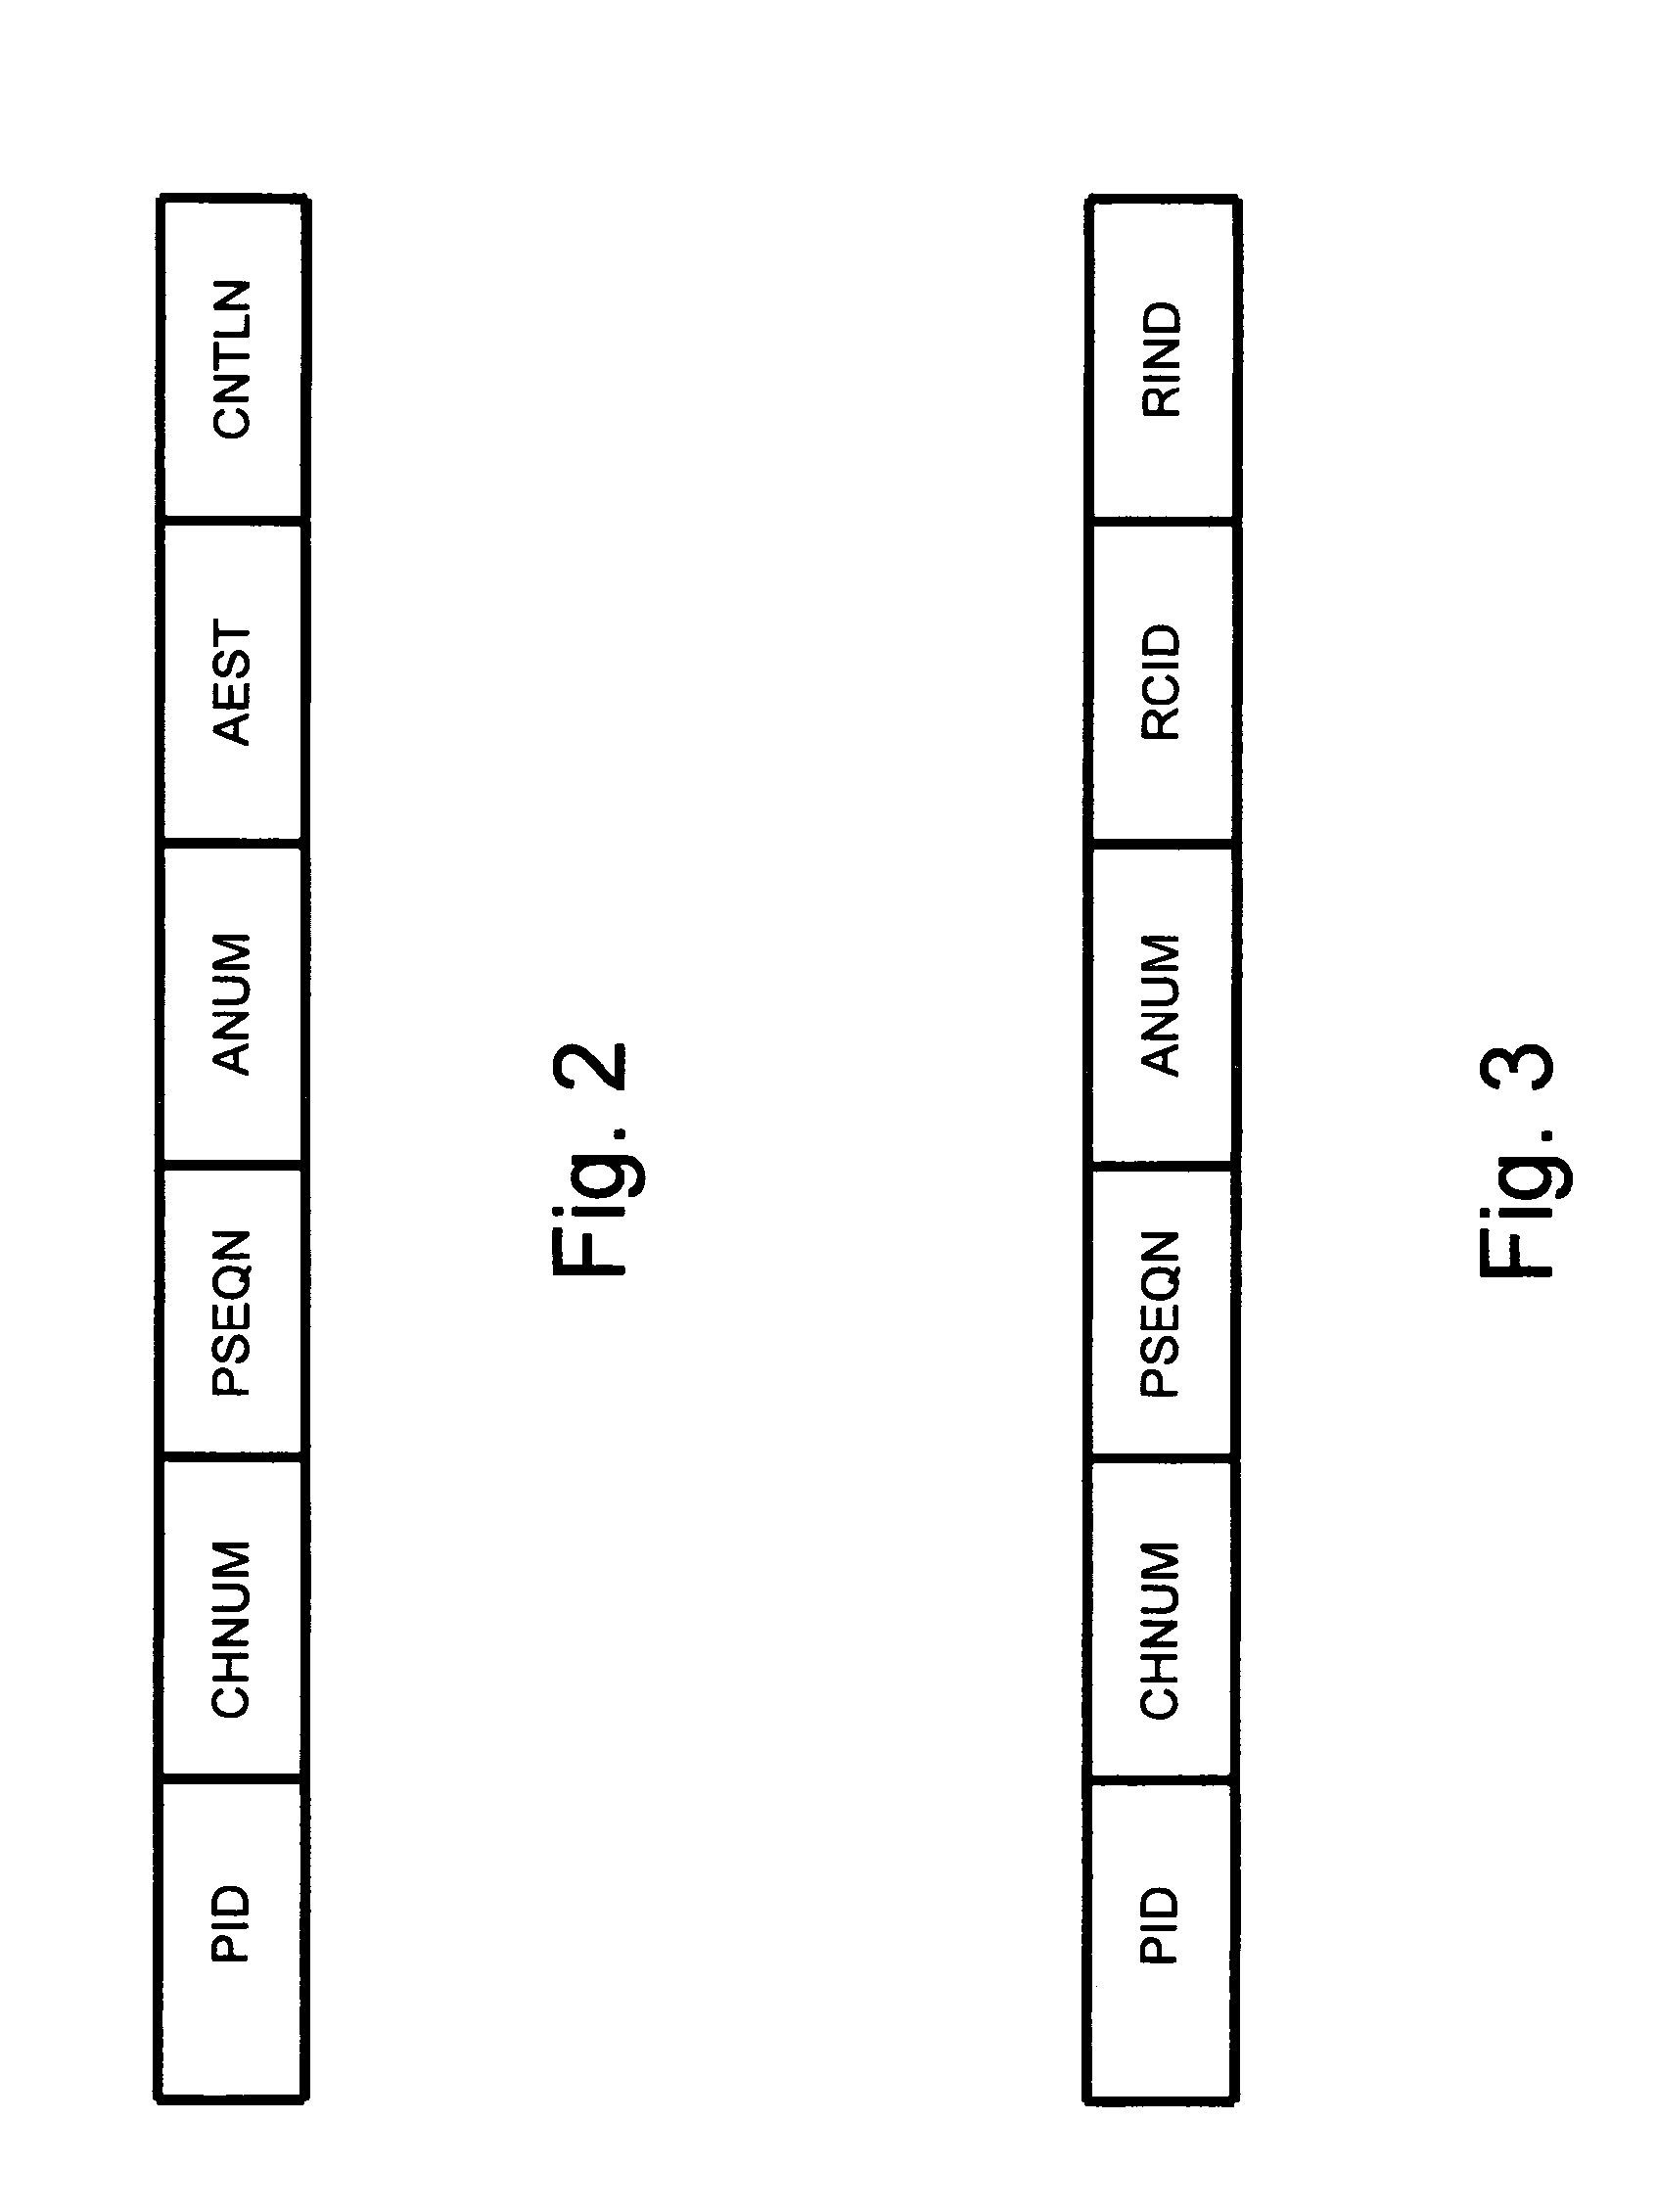 System for estimating audience size in a digital broadcast environment using control packets and predictions